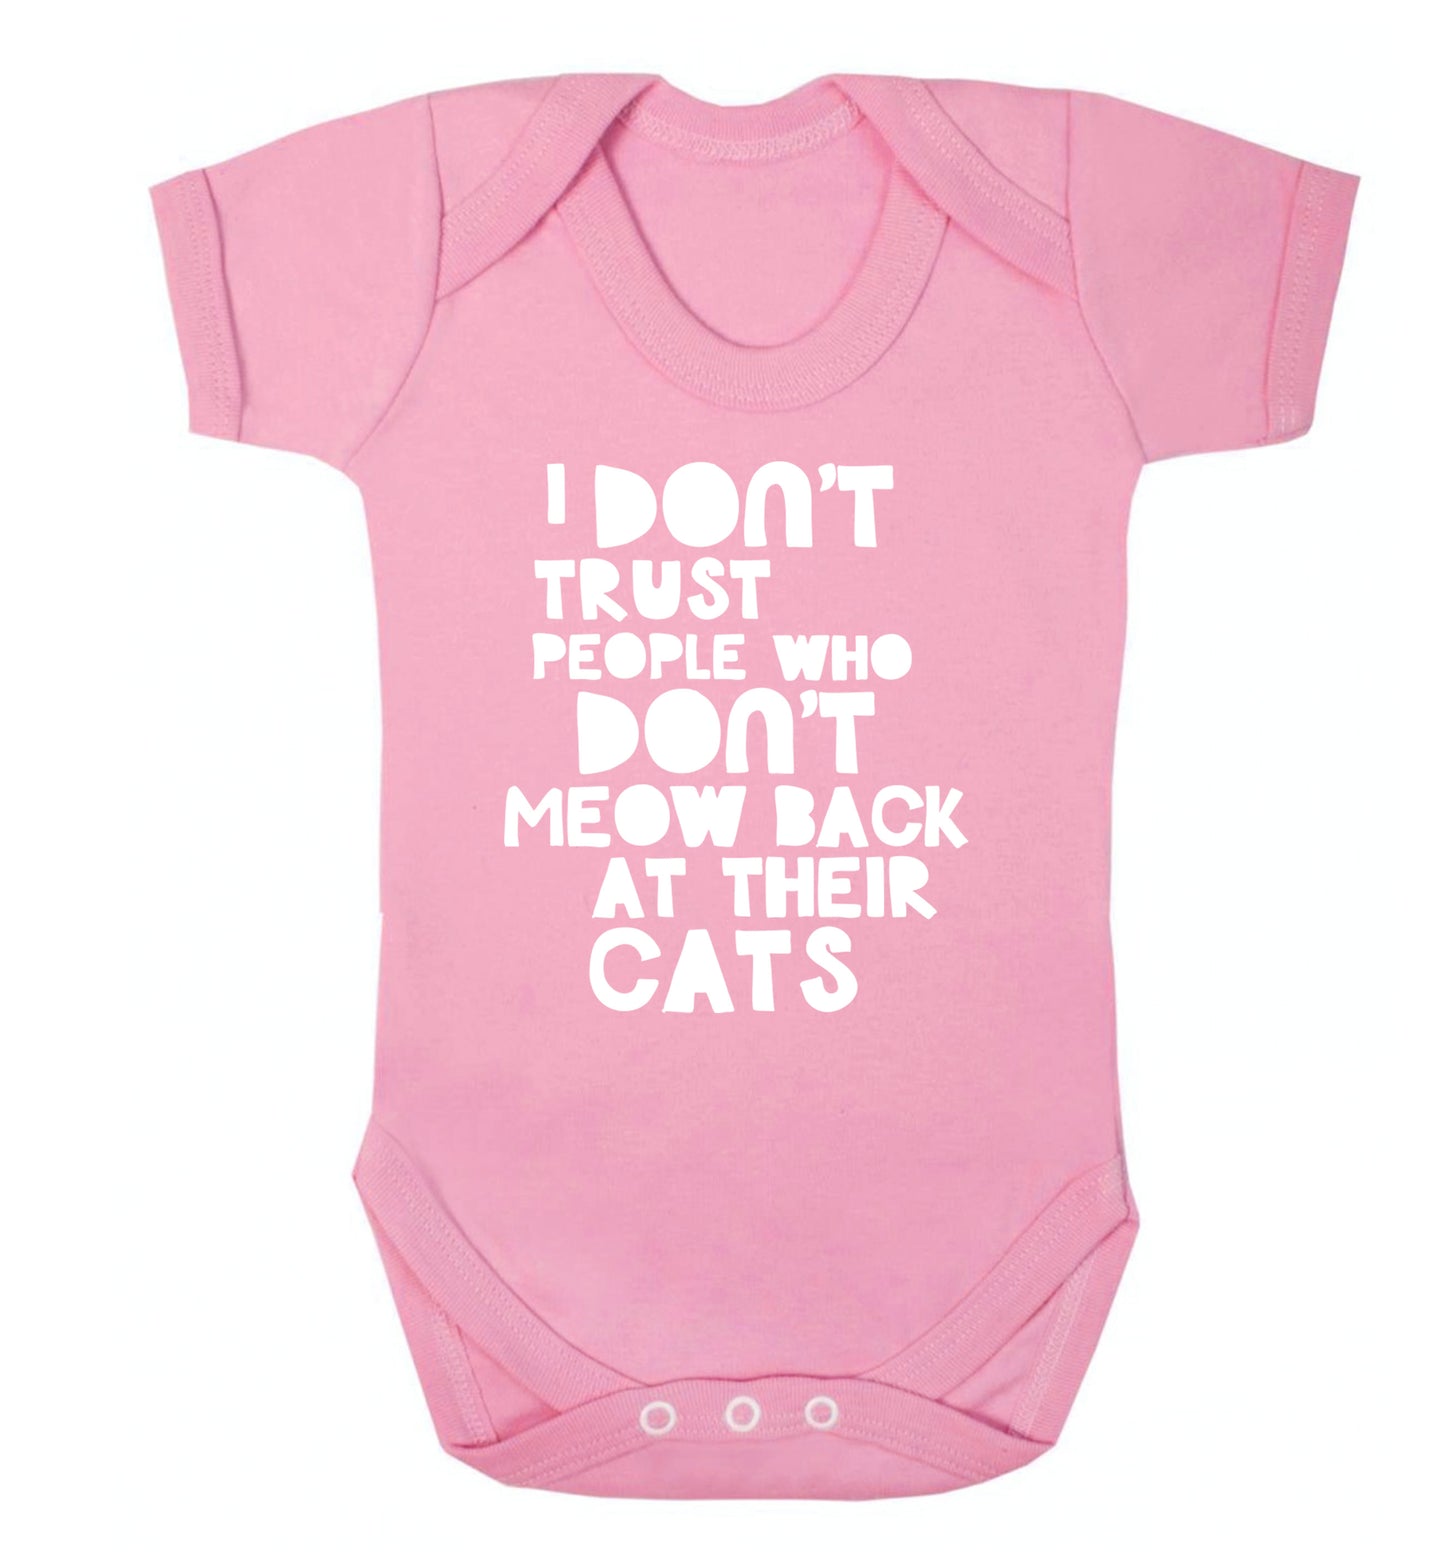 I don't trust people who don't meow back at their cats Baby Vest pale pink 18-24 months